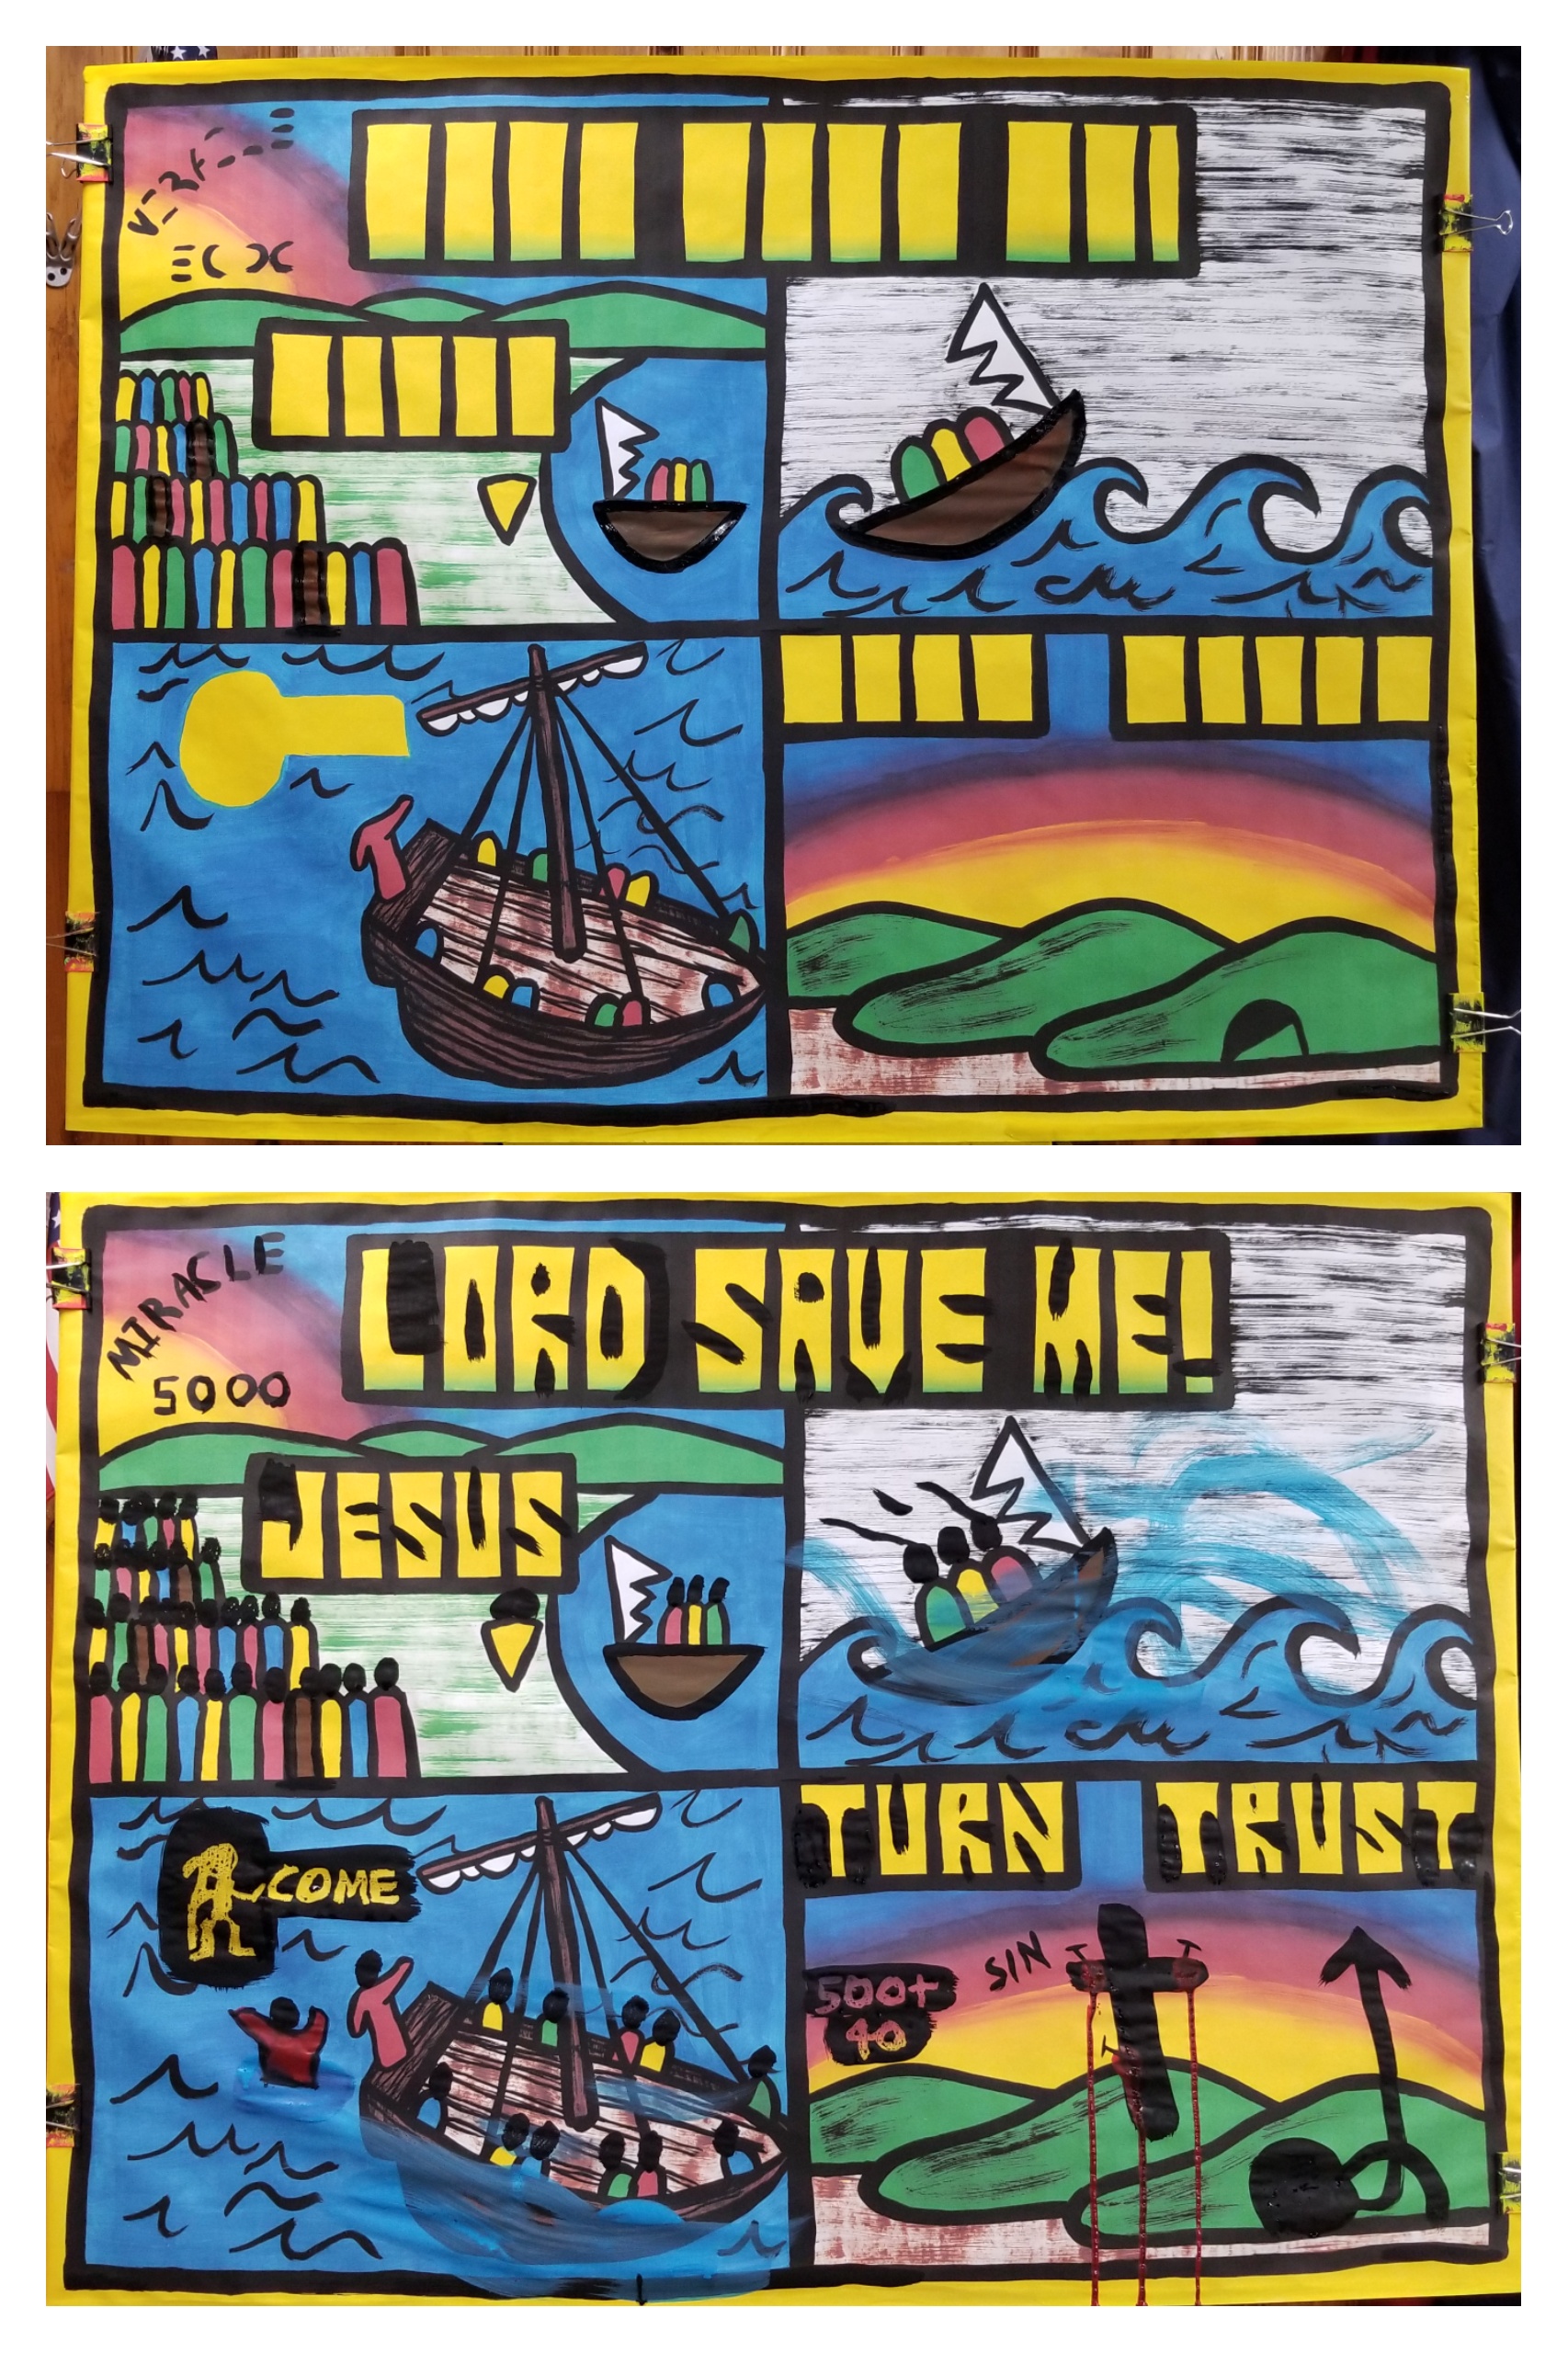 Part 5 in a 5-part series on the "Early Ministry of Jesus."  This message teaches about Jesus feeding 5,000 and walking on water, proving that He is the Lord God.   When Peter came out into the water and started to sink, he cried out to Jesus, "Lord, Save Me!"   That is what we must all do! We are all drowning in sin and only Jesus can save us.   Jesus gave His life on the cross and rose again, defeating death, the grave, and sin! He was seen after His resurrection by over 500 witnesses for 40 days.  If we turn from our sin and trust the good news, we will have eternal life! Great news!!! Thank You Jesus!